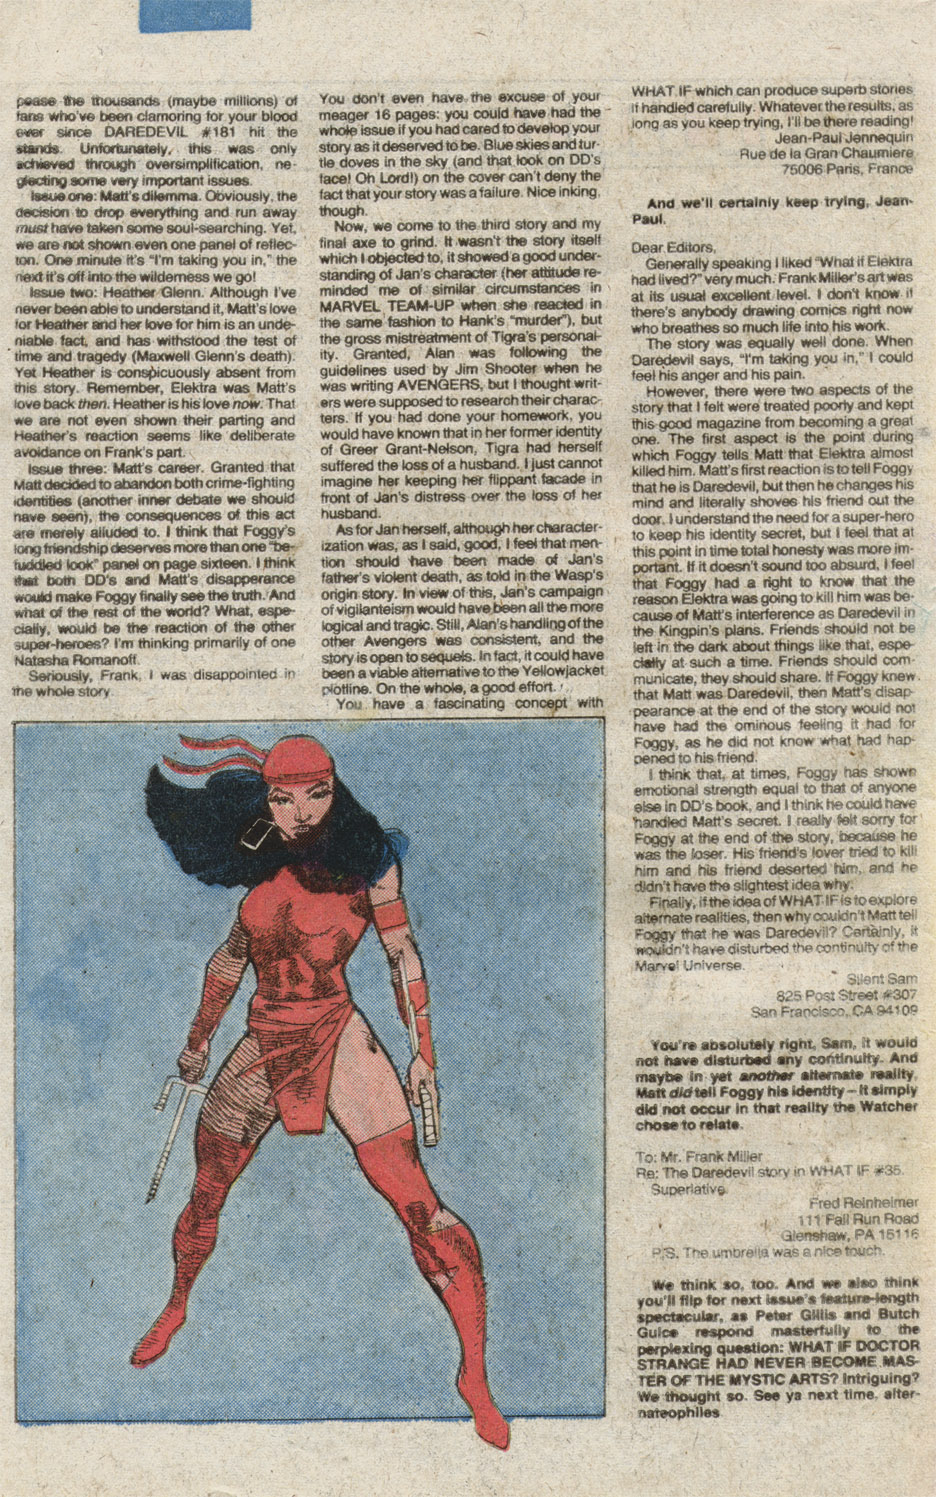 What If? (1977) issue 39 - Thor battled conan - Page 50